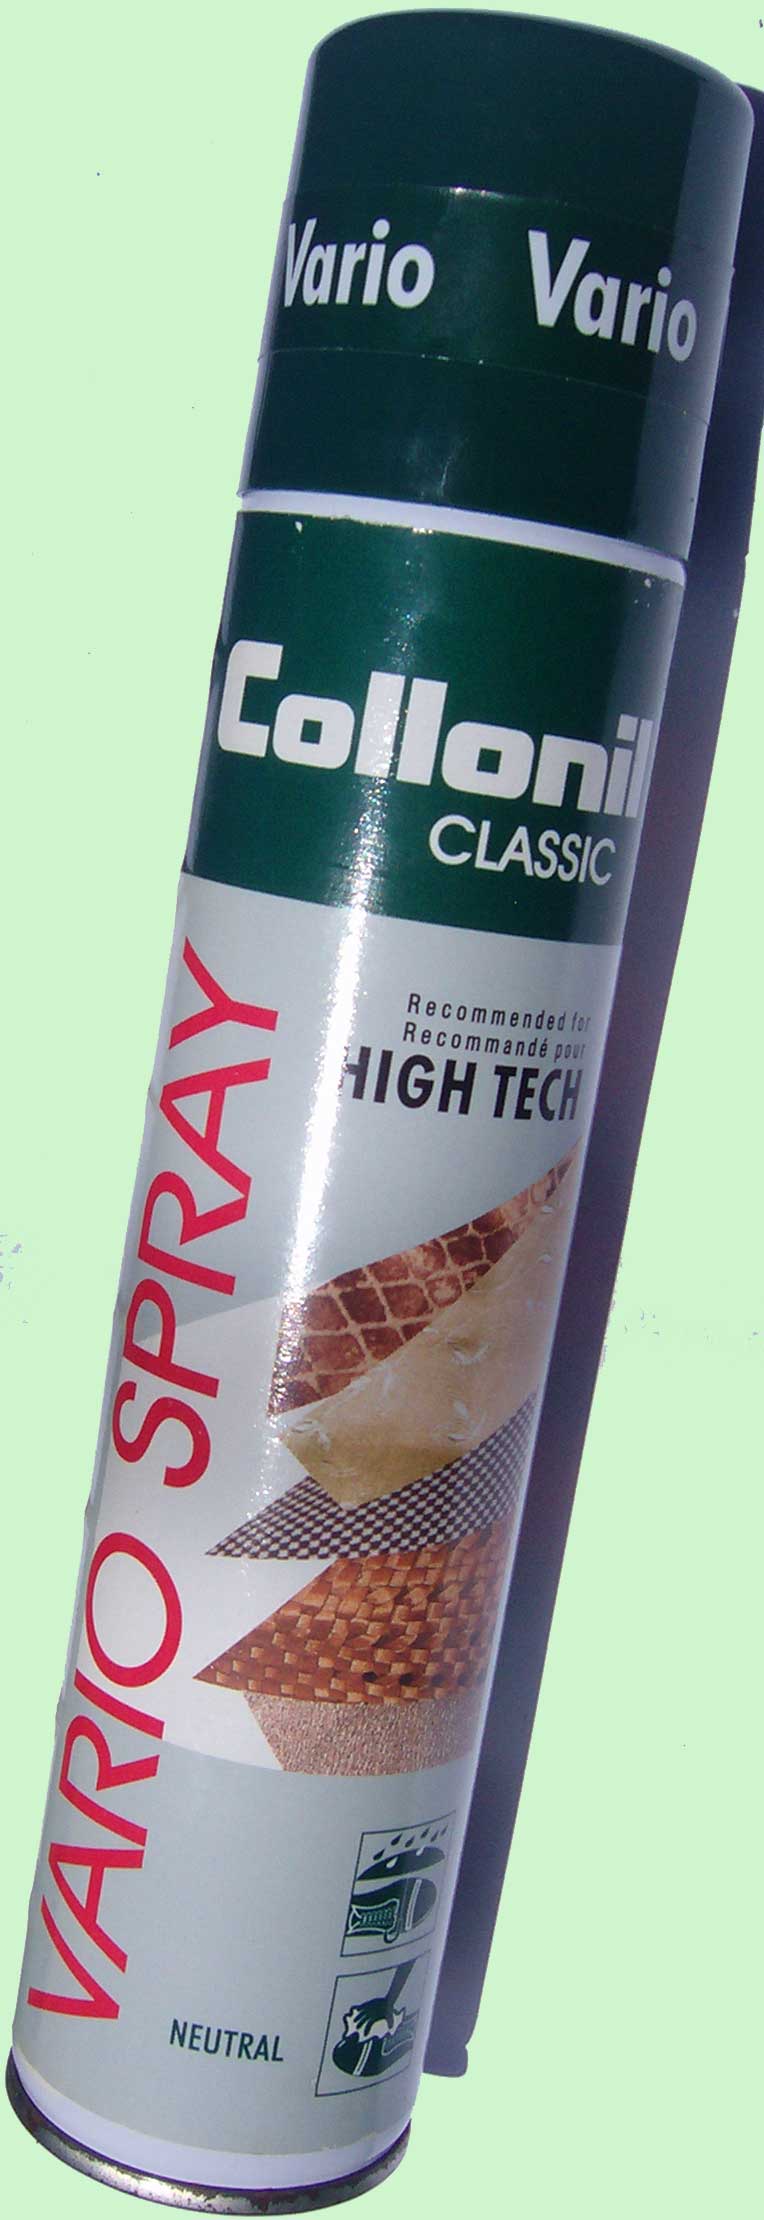 Waterproofing Spray for leathers and textiles